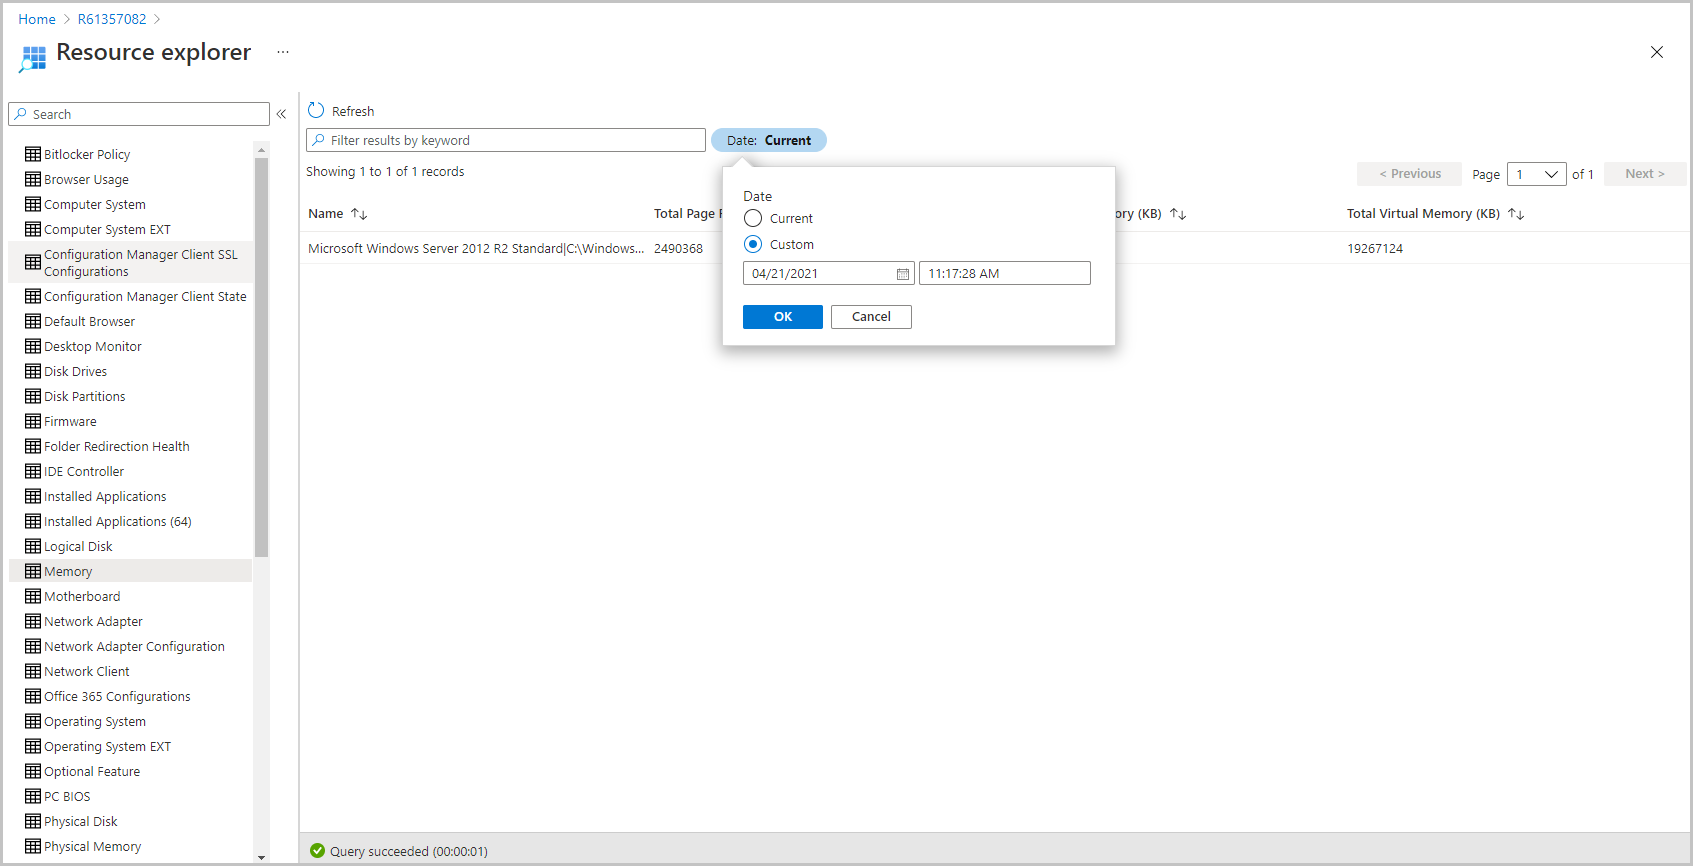 Screenshot of choosing a date from Resource explorer in the Microsoft Endpoint Manager admin center 